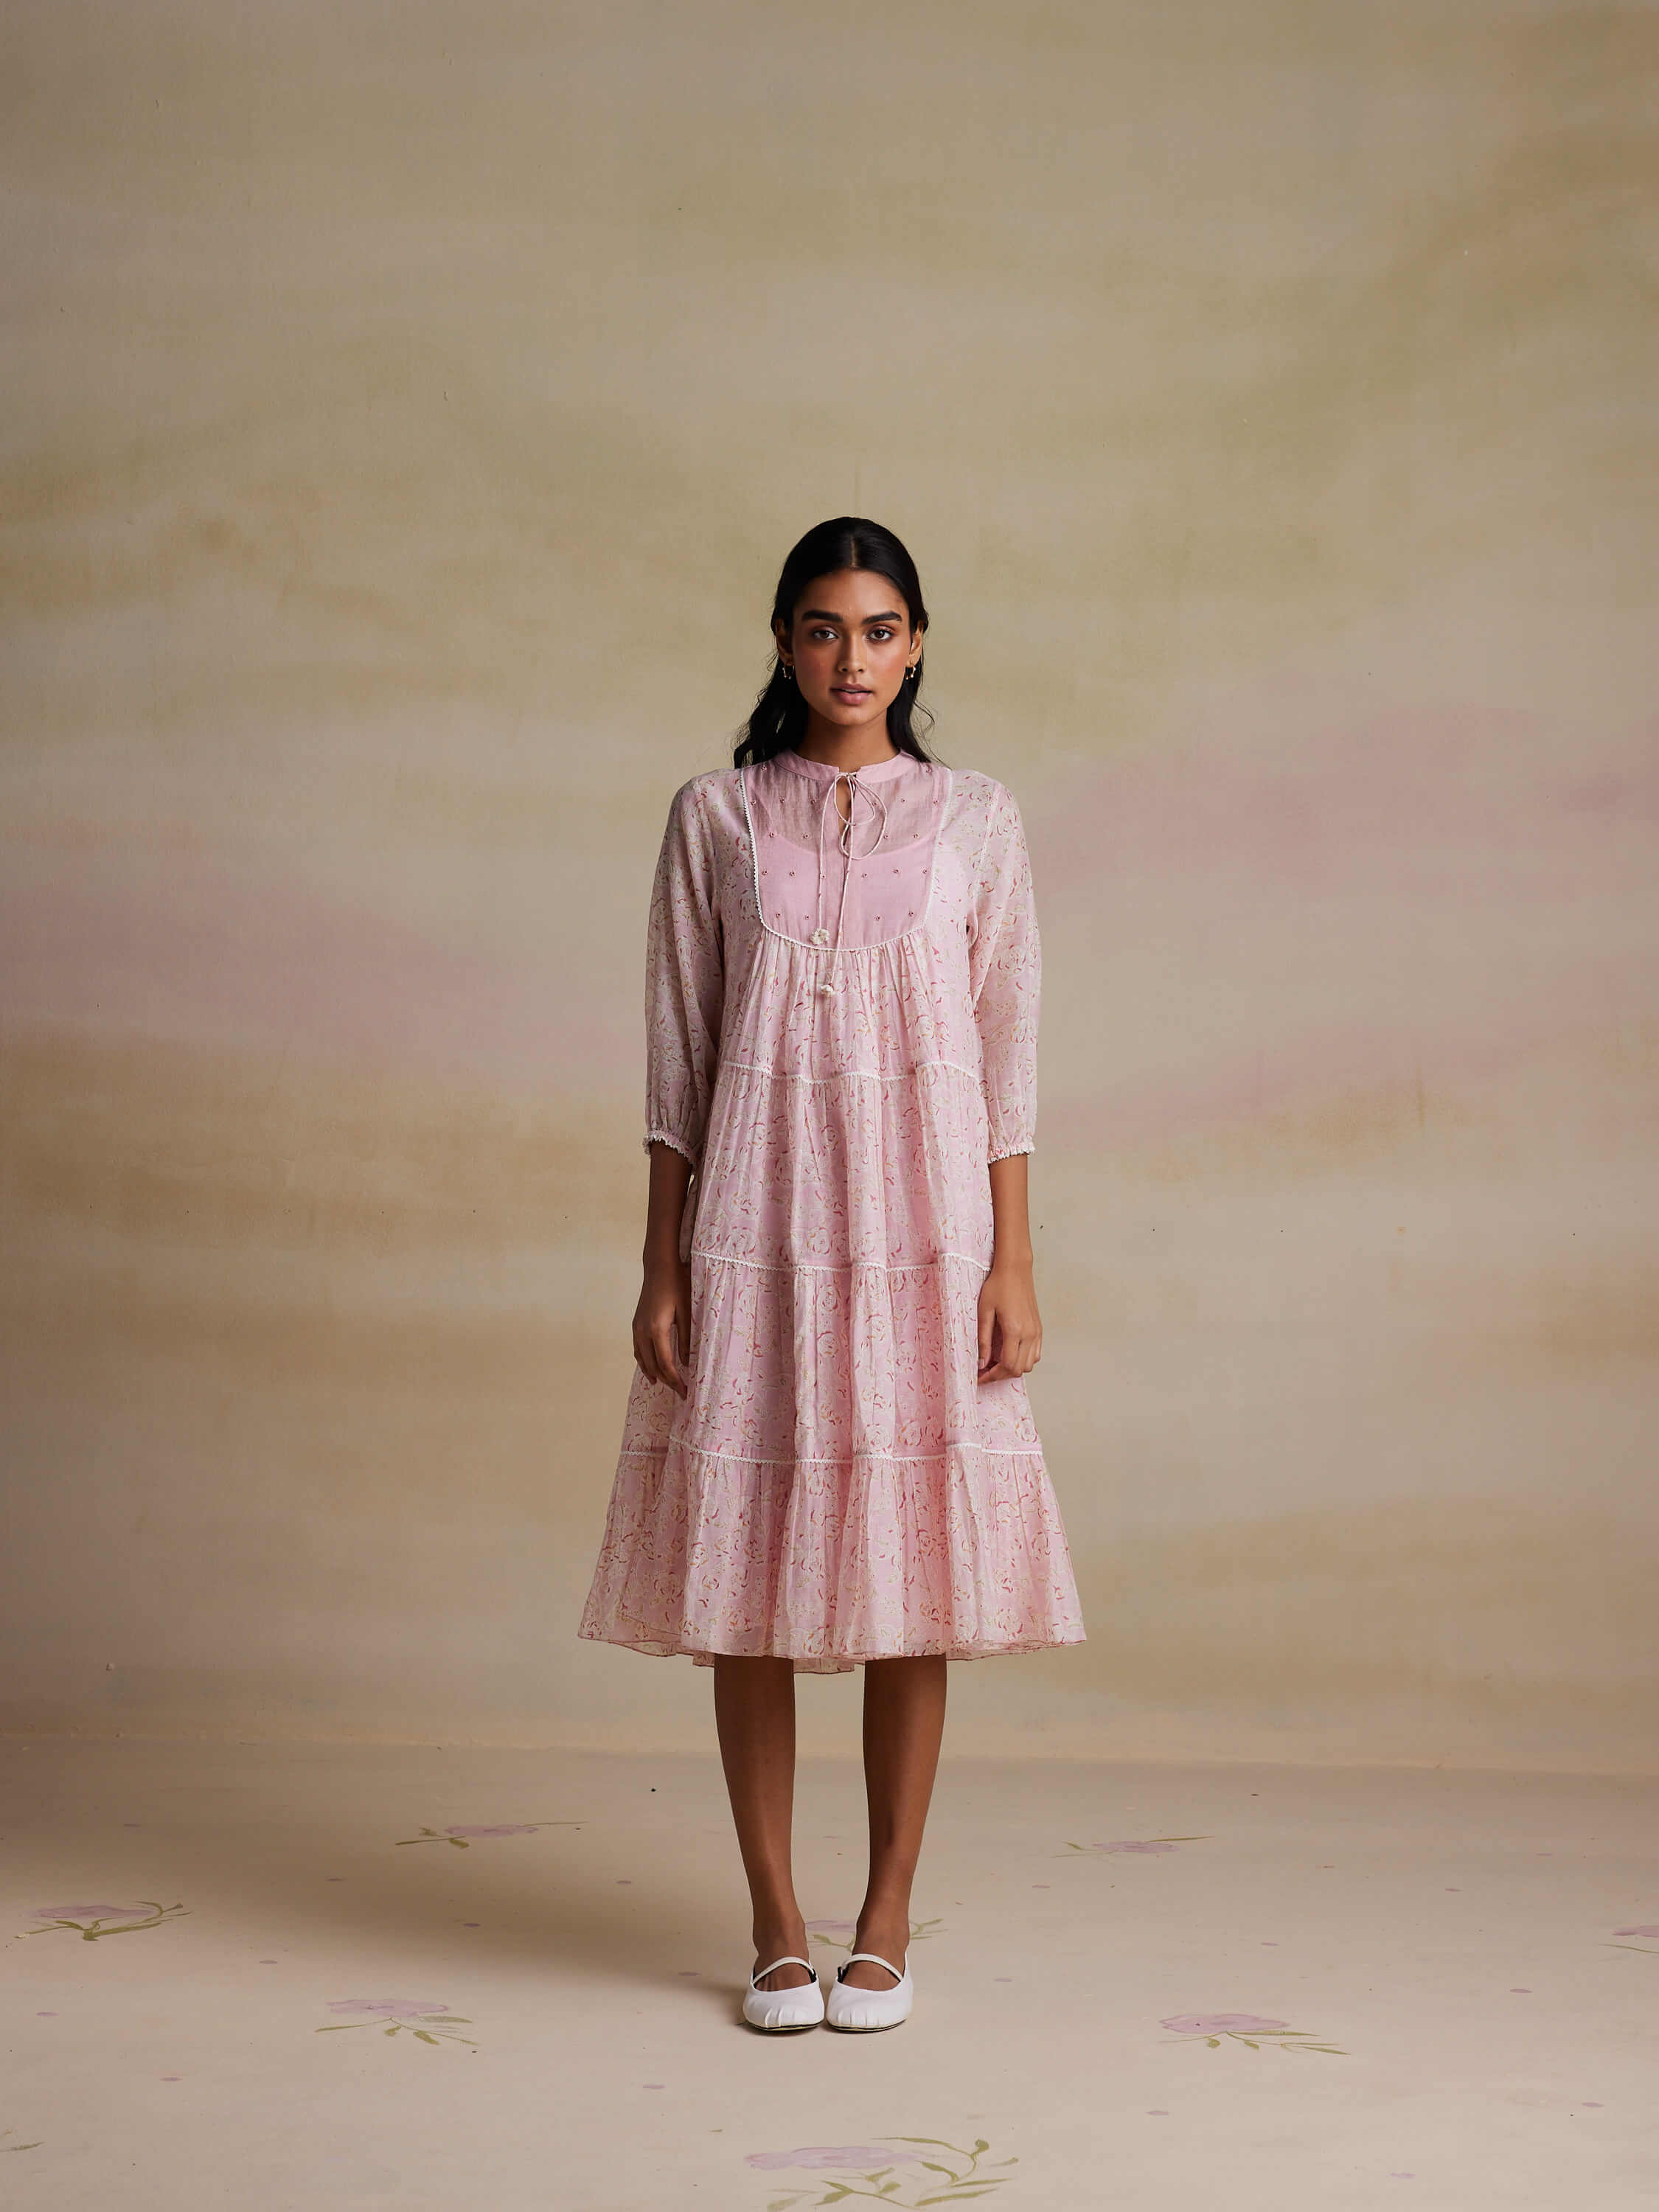 Woman Modeling Pink Floral Long-Sleeve Dress in Studio Photoshoot